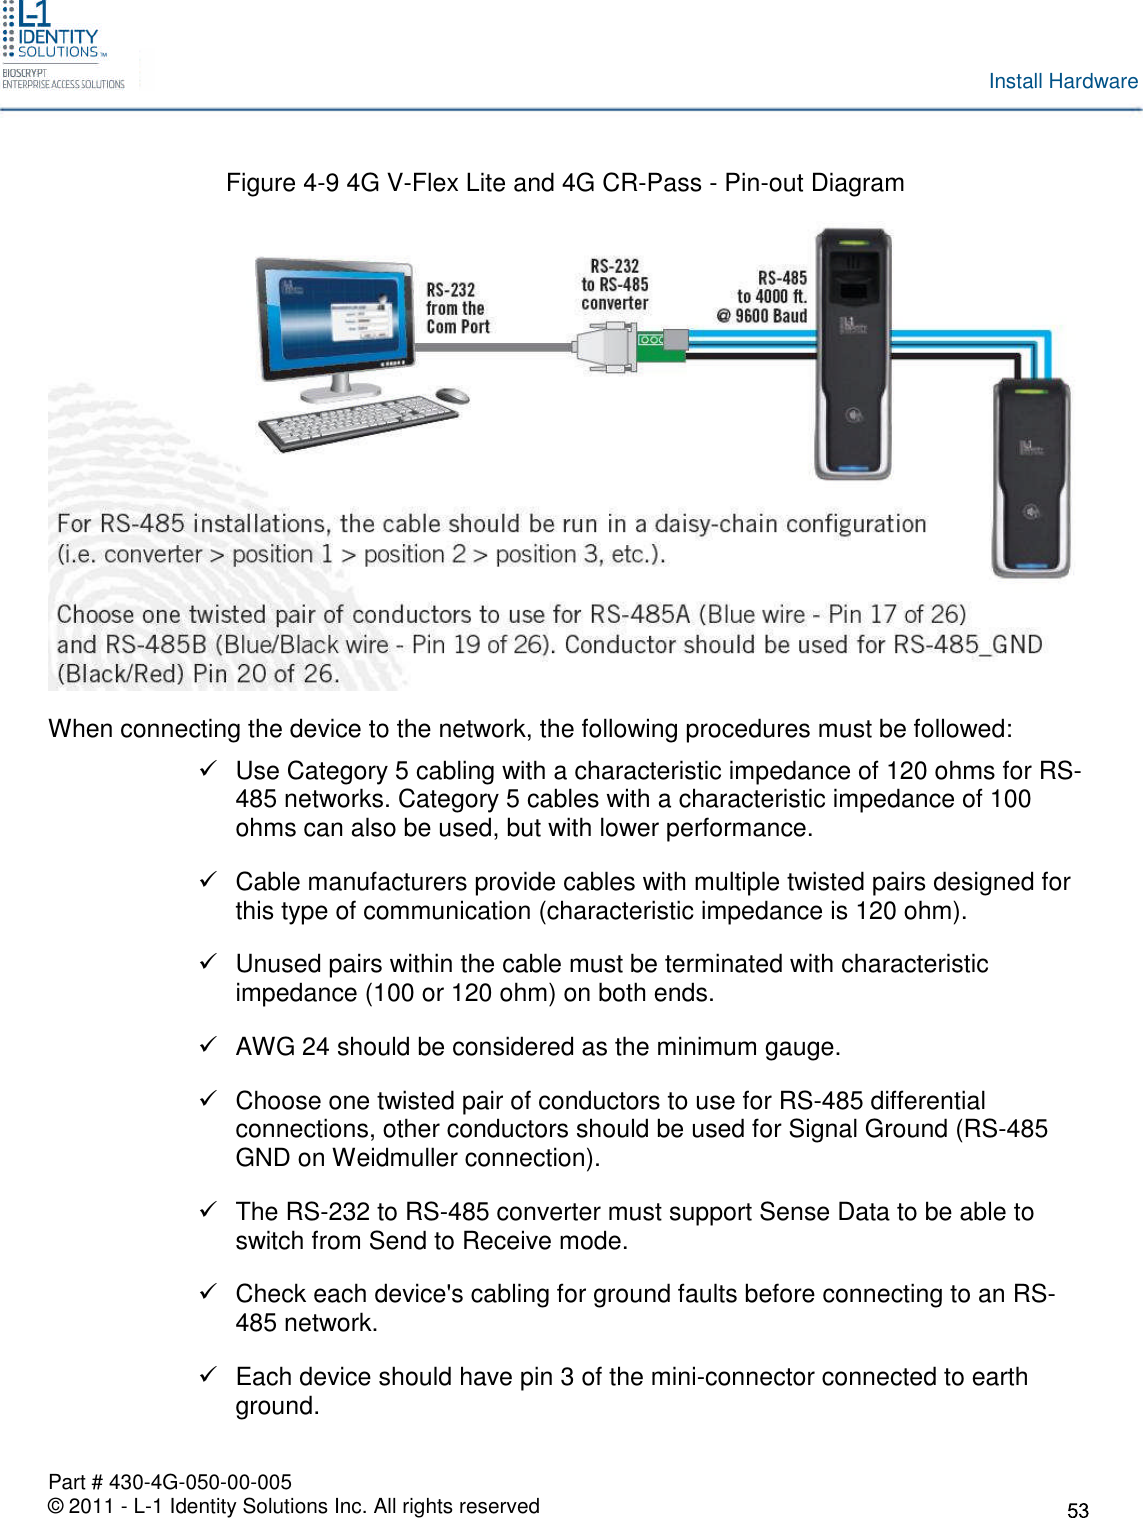 Part # 430-4G-050-00-005© 2011 - L-1 Identity Solutions Inc. All rights reservedInstall HardwareFigure 4-9 4G V-Flex Lite and 4G CR-Pass - Pin-out DiagramWhen connecting the device to the network, the following procedures must be followed:Use Category 5 cabling with a characteristic impedance of 120 ohms for RS-485 networks. Category 5 cables with a characteristic impedance of 100ohms can also be used, but with lower performance.Cable manufacturers provide cables with multiple twisted pairs designed forthis type of communication (characteristic impedance is 120 ohm).Unused pairs within the cable must be terminated with characteristicimpedance (100 or 120 ohm) on both ends.AWG 24 should be considered as the minimum gauge.Choose one twisted pair of conductors to use for RS-485 differentialconnections, other conductors should be used for Signal Ground (RS-485GND on Weidmuller connection).The RS-232 to RS-485 converter must support Sense Data to be able toswitch from Send to Receive mode.Check each device&apos;s cabling for ground faults before connecting to an RS-485 network.Each device should have pin 3 of the mini-connector connected to earthground.